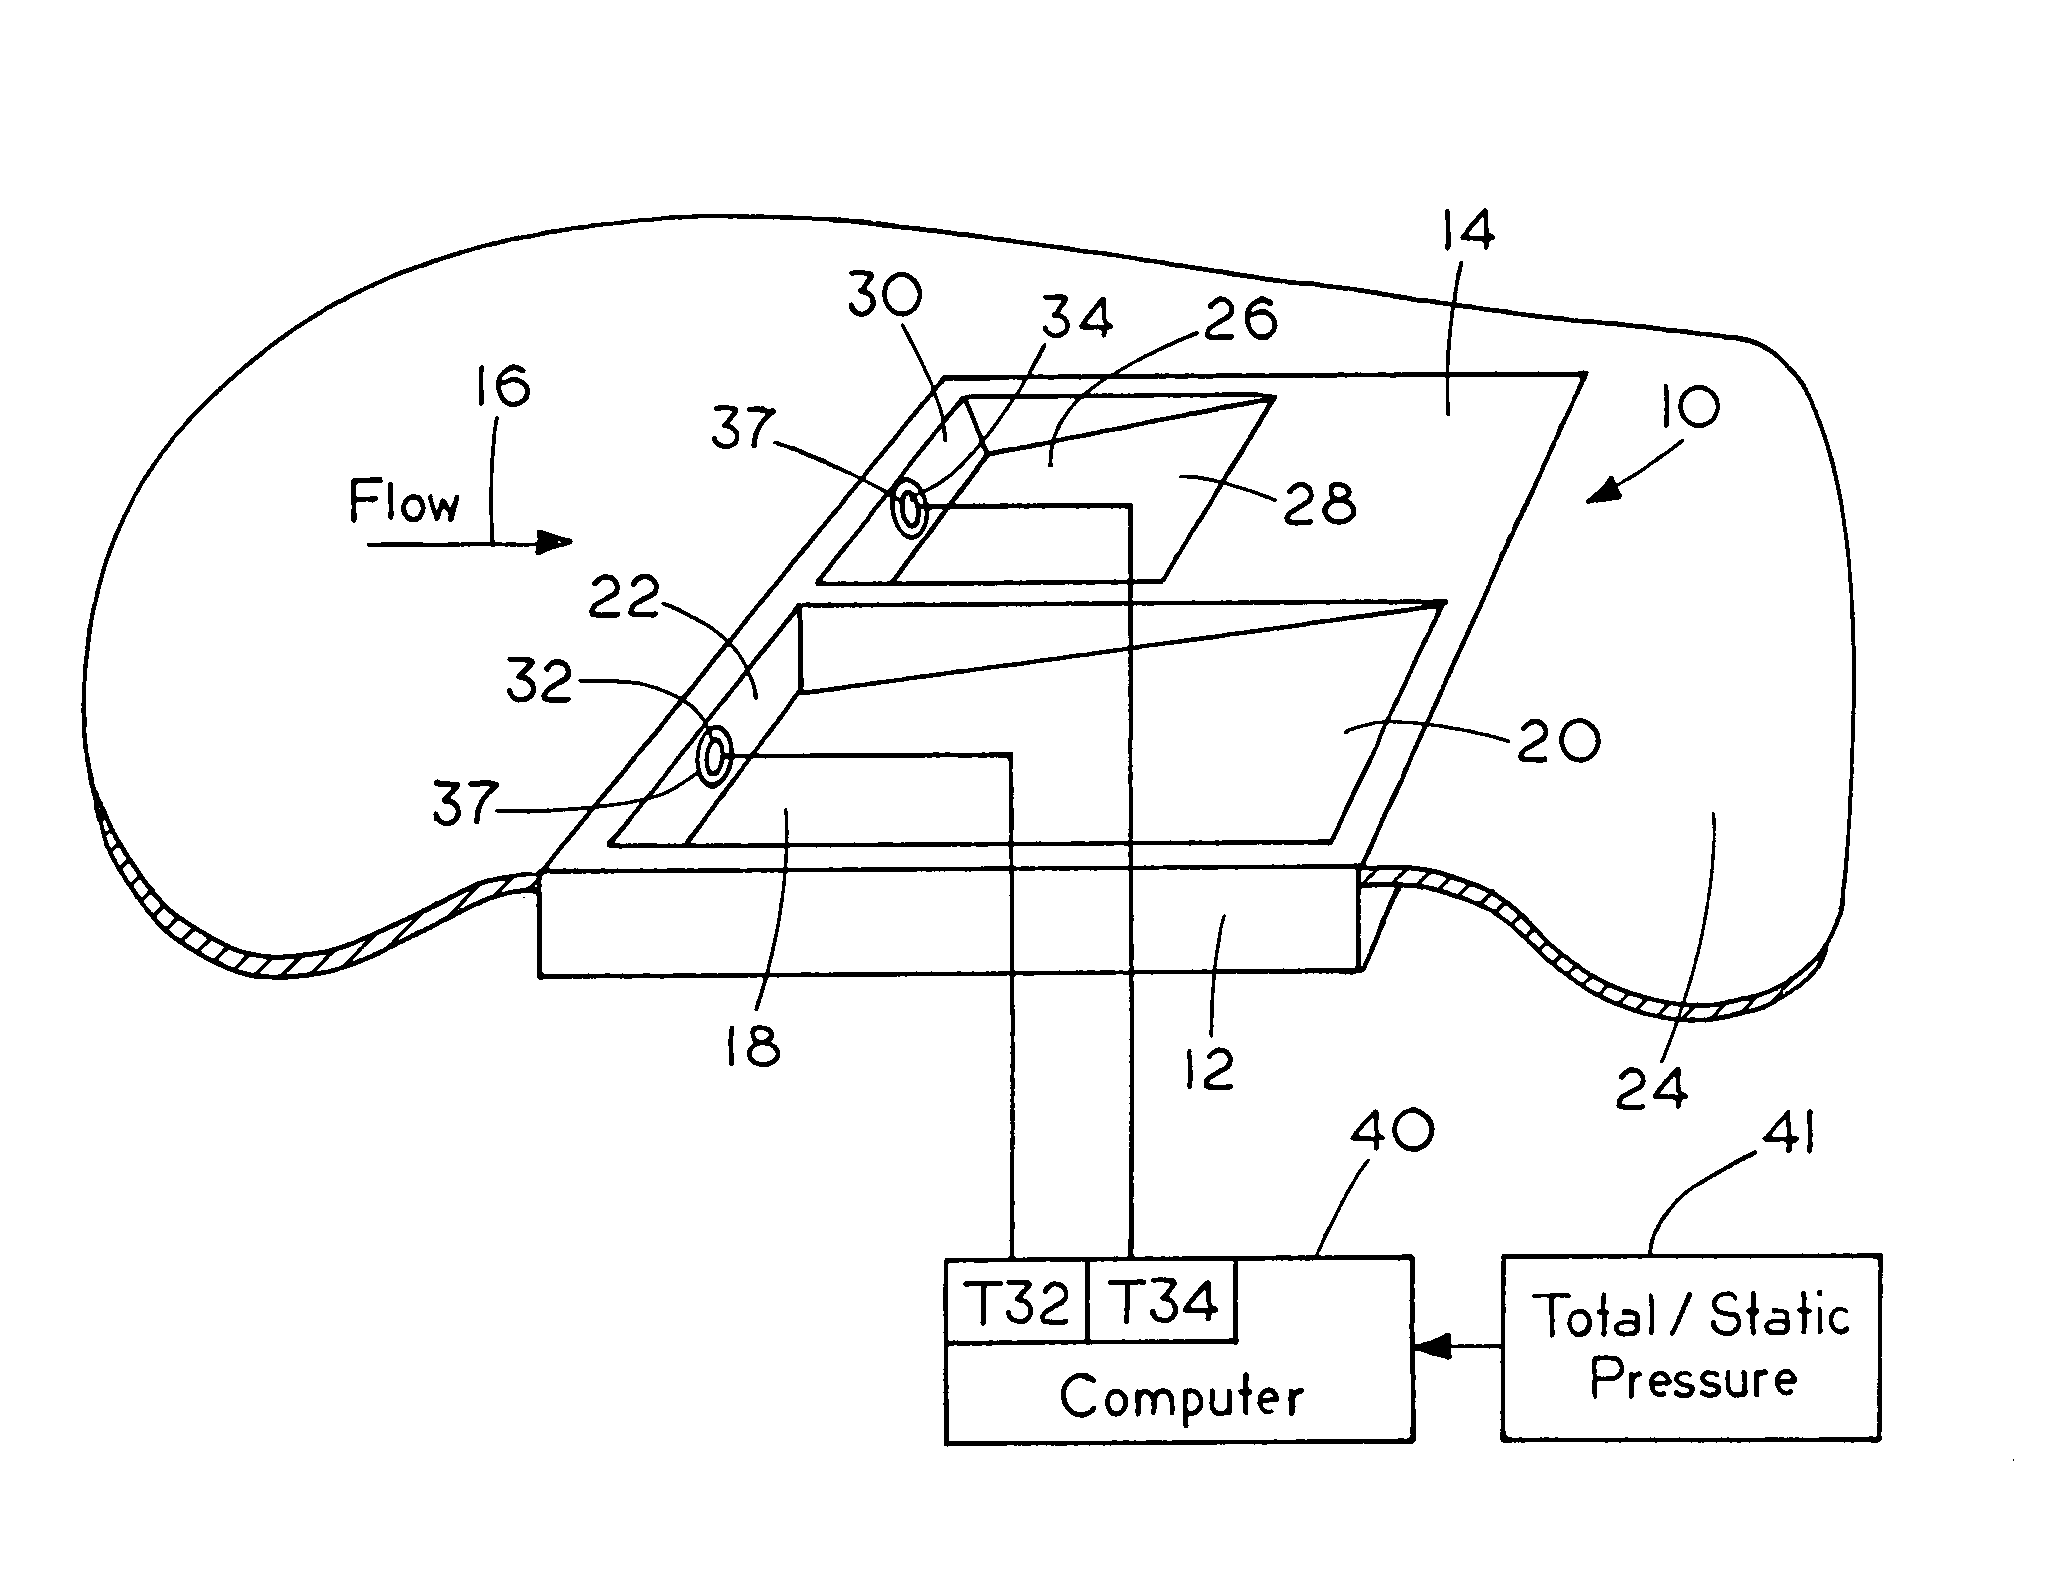 Sensor assembly for determining total temperature, static temperature and Mach number